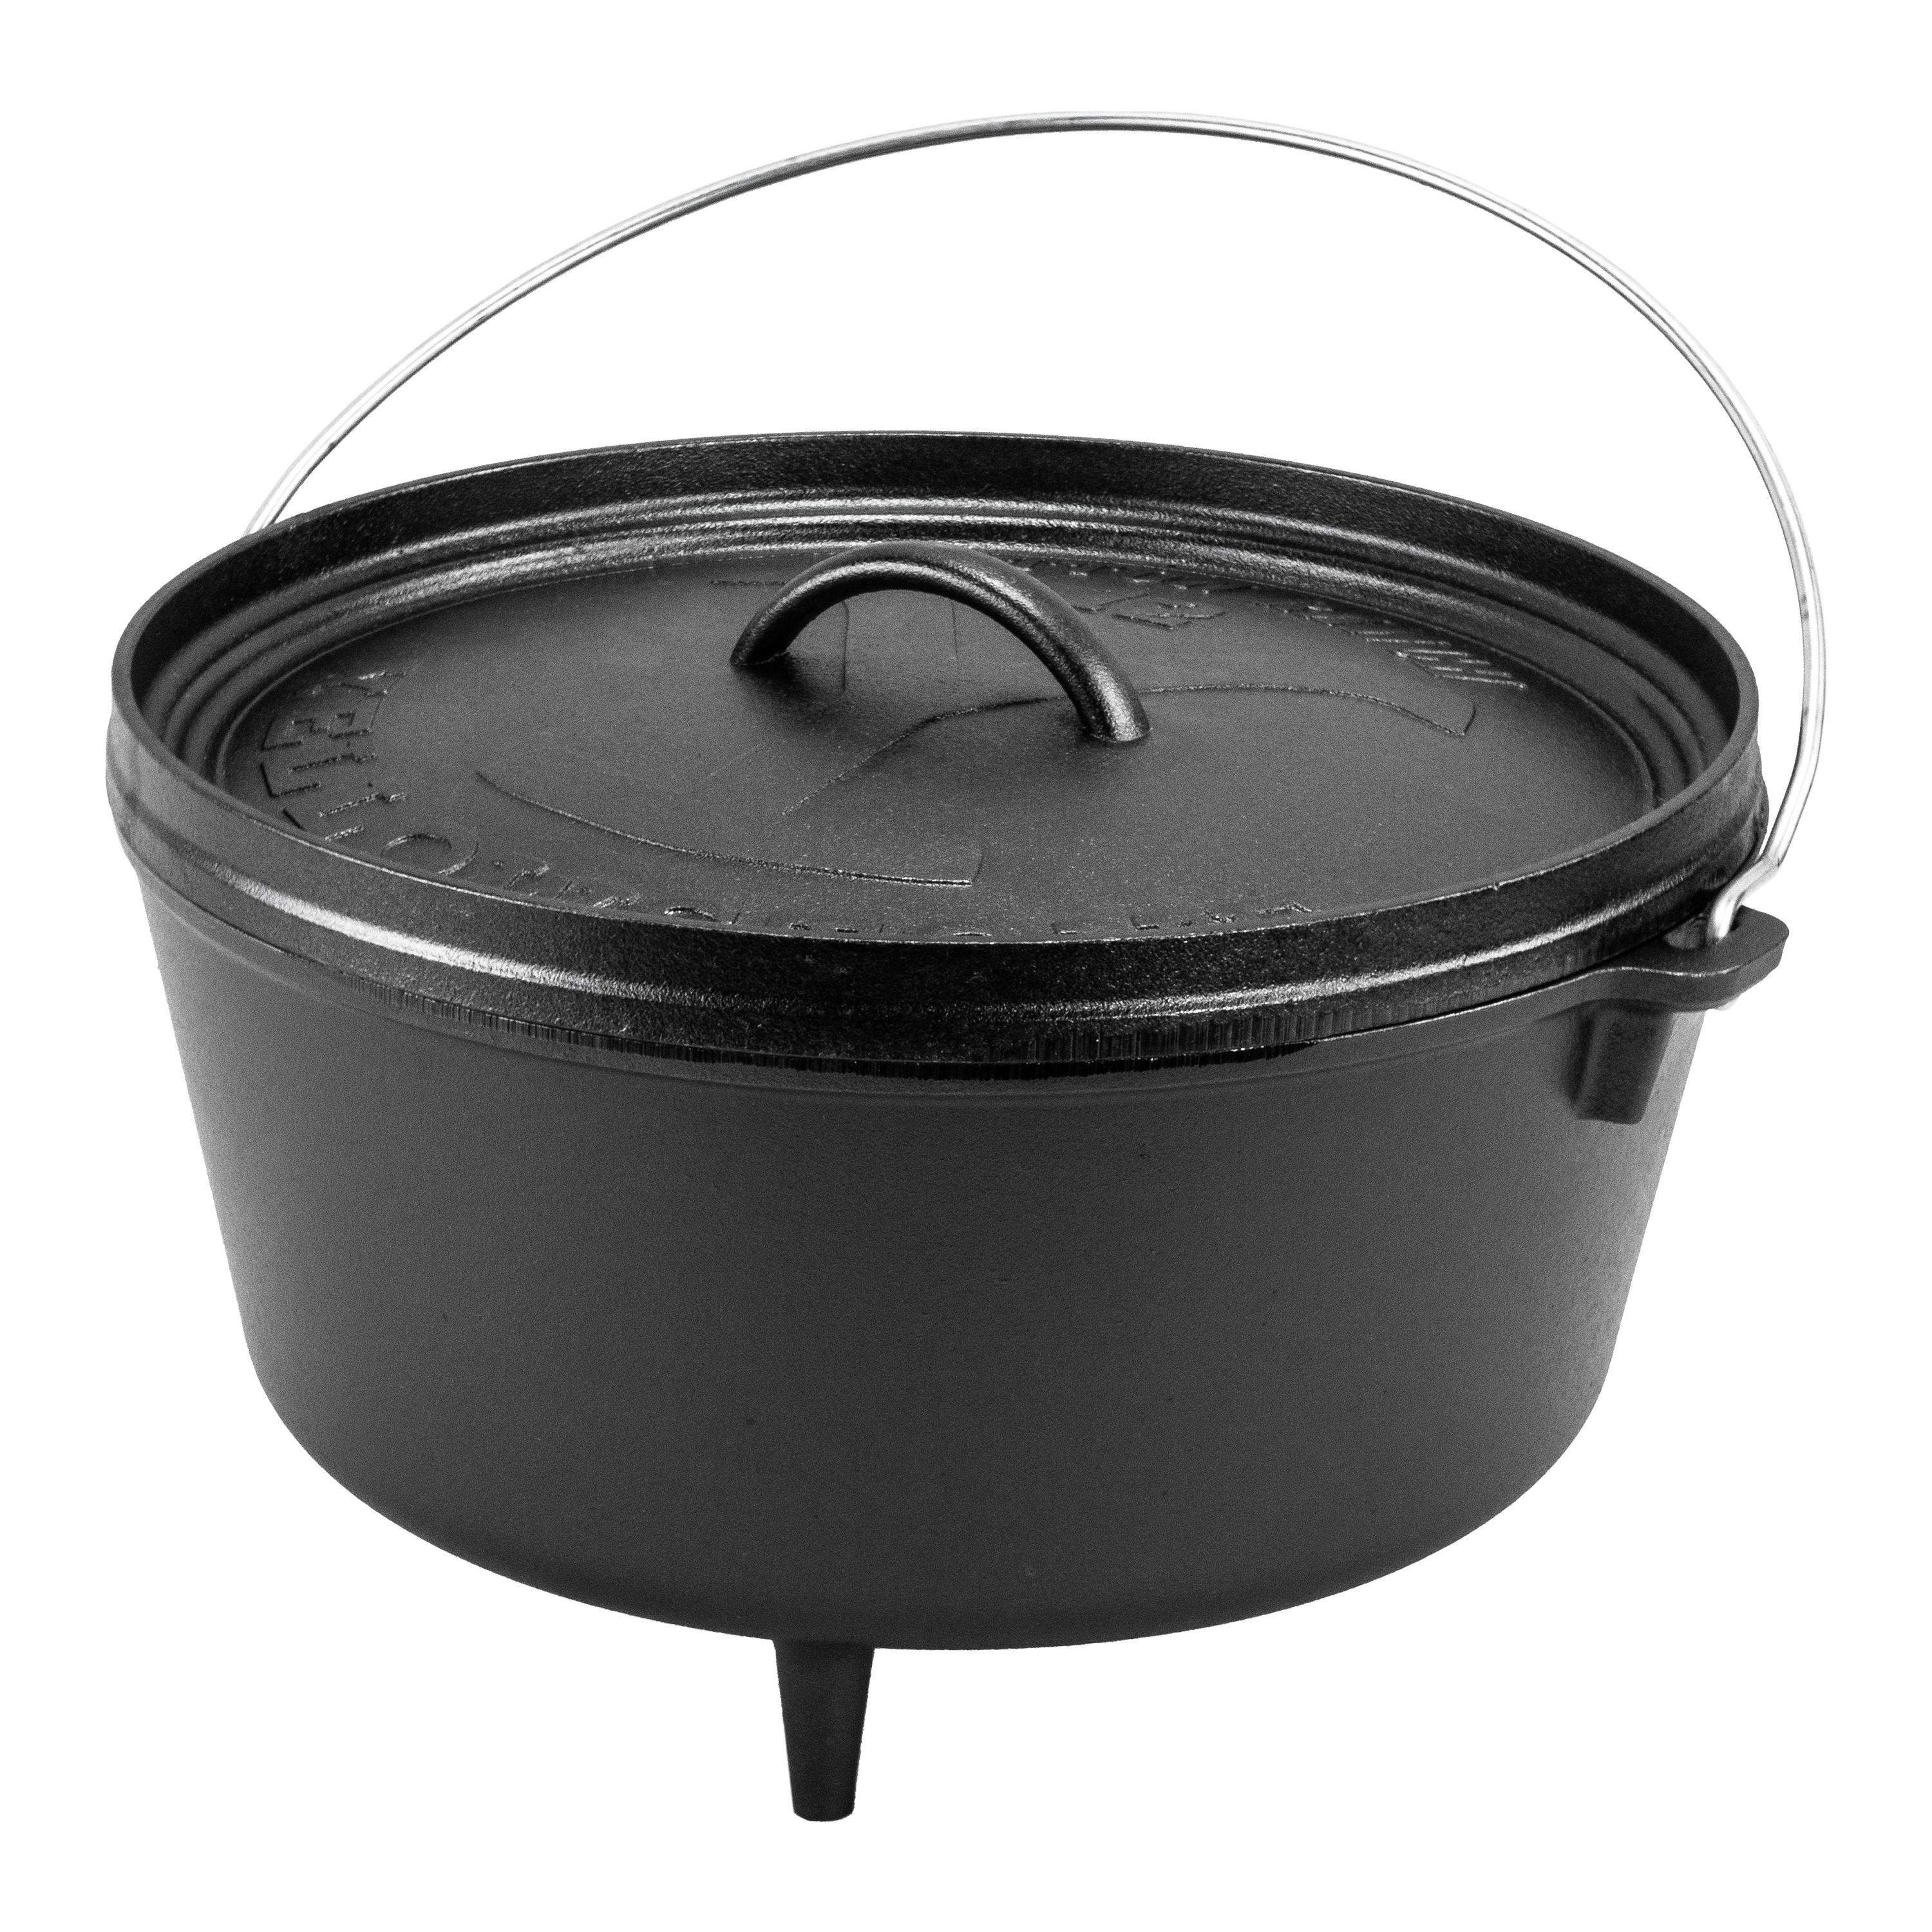 12 Inch / 5 Quart Cast Iron Covered Deep Skillet Lodge - New Kitchen Store